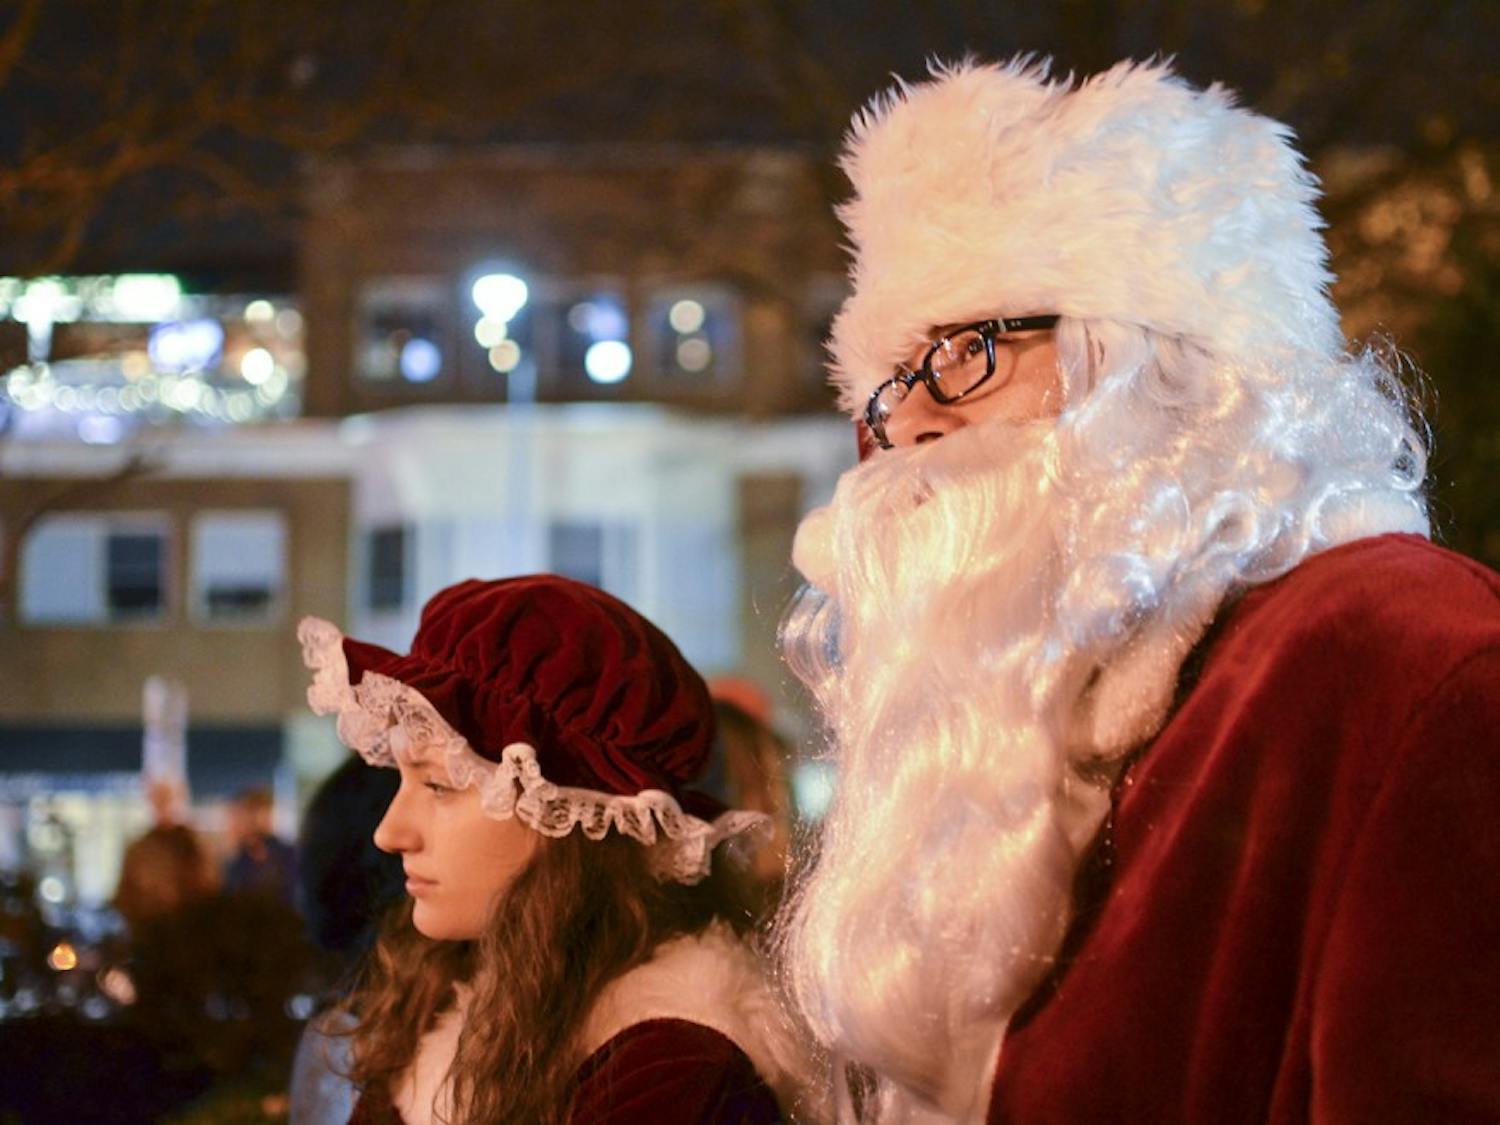 Santa Claus participates in the annual tree lighting ceremony at University Baptist Church on Sunday.